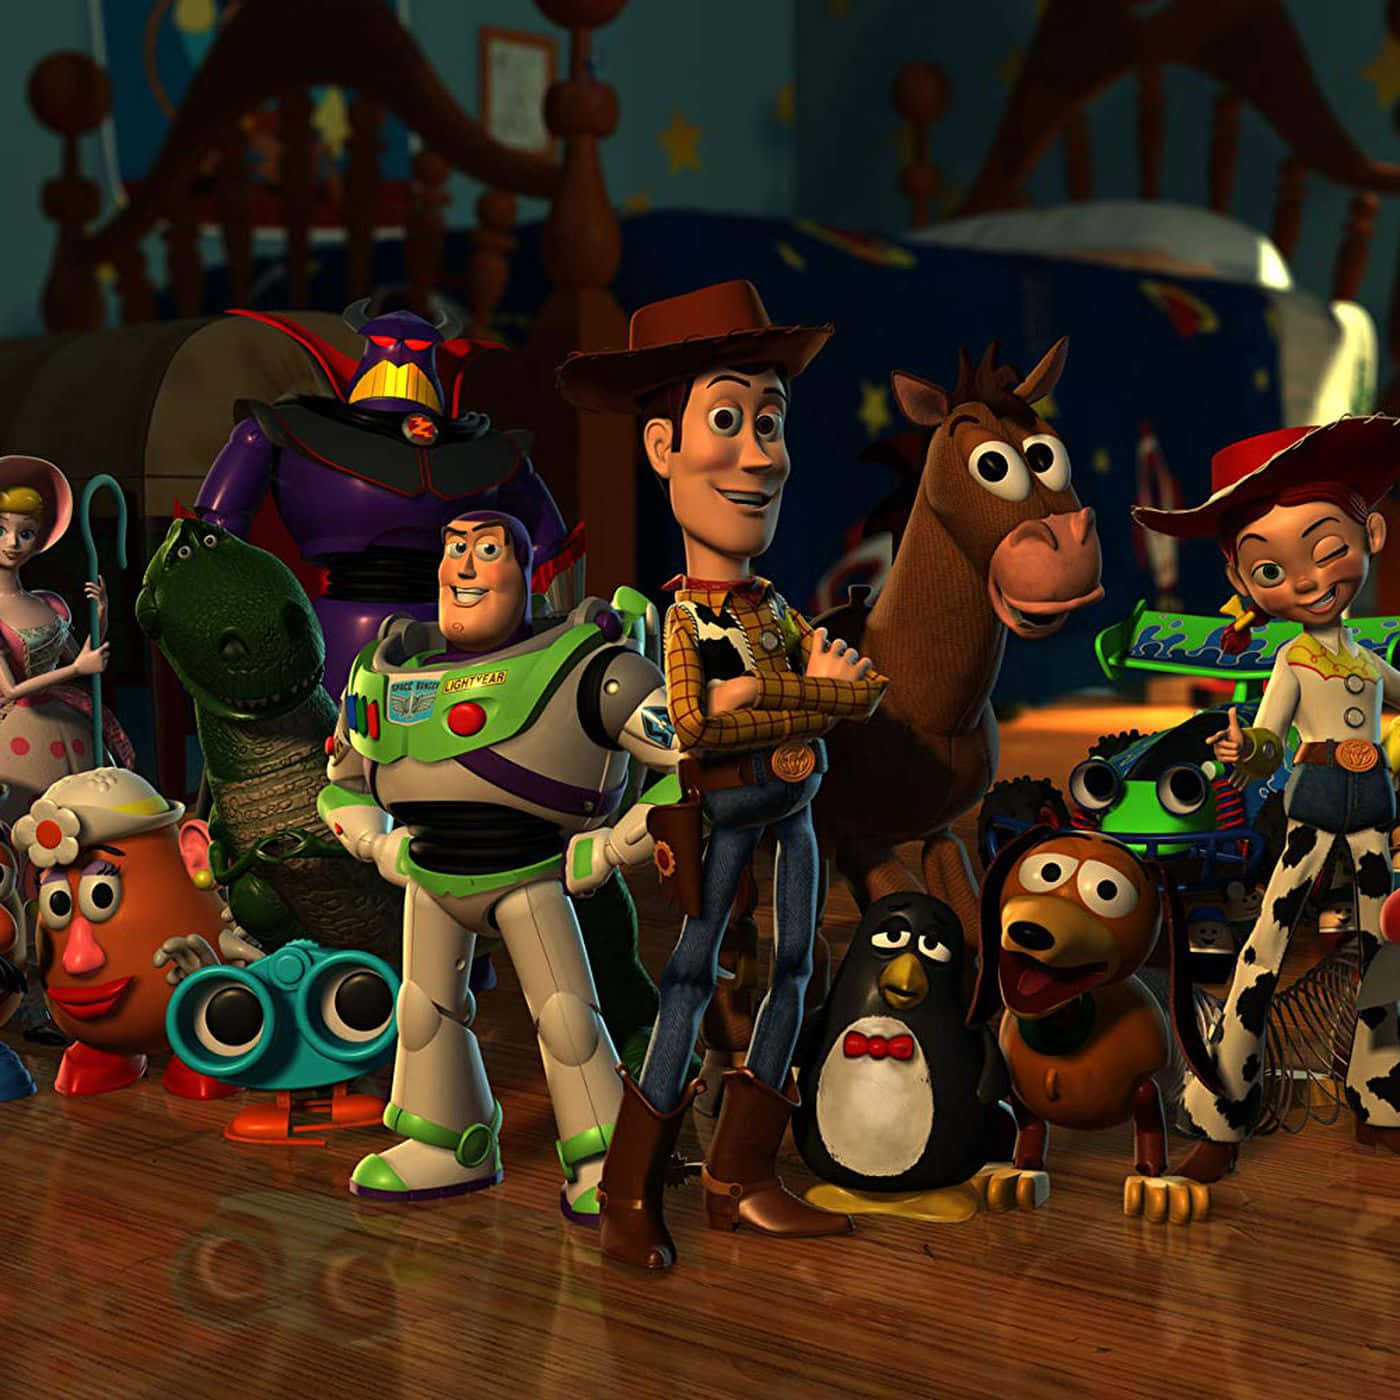 Toy Story 2 Woody Buzz Lightyear Picture